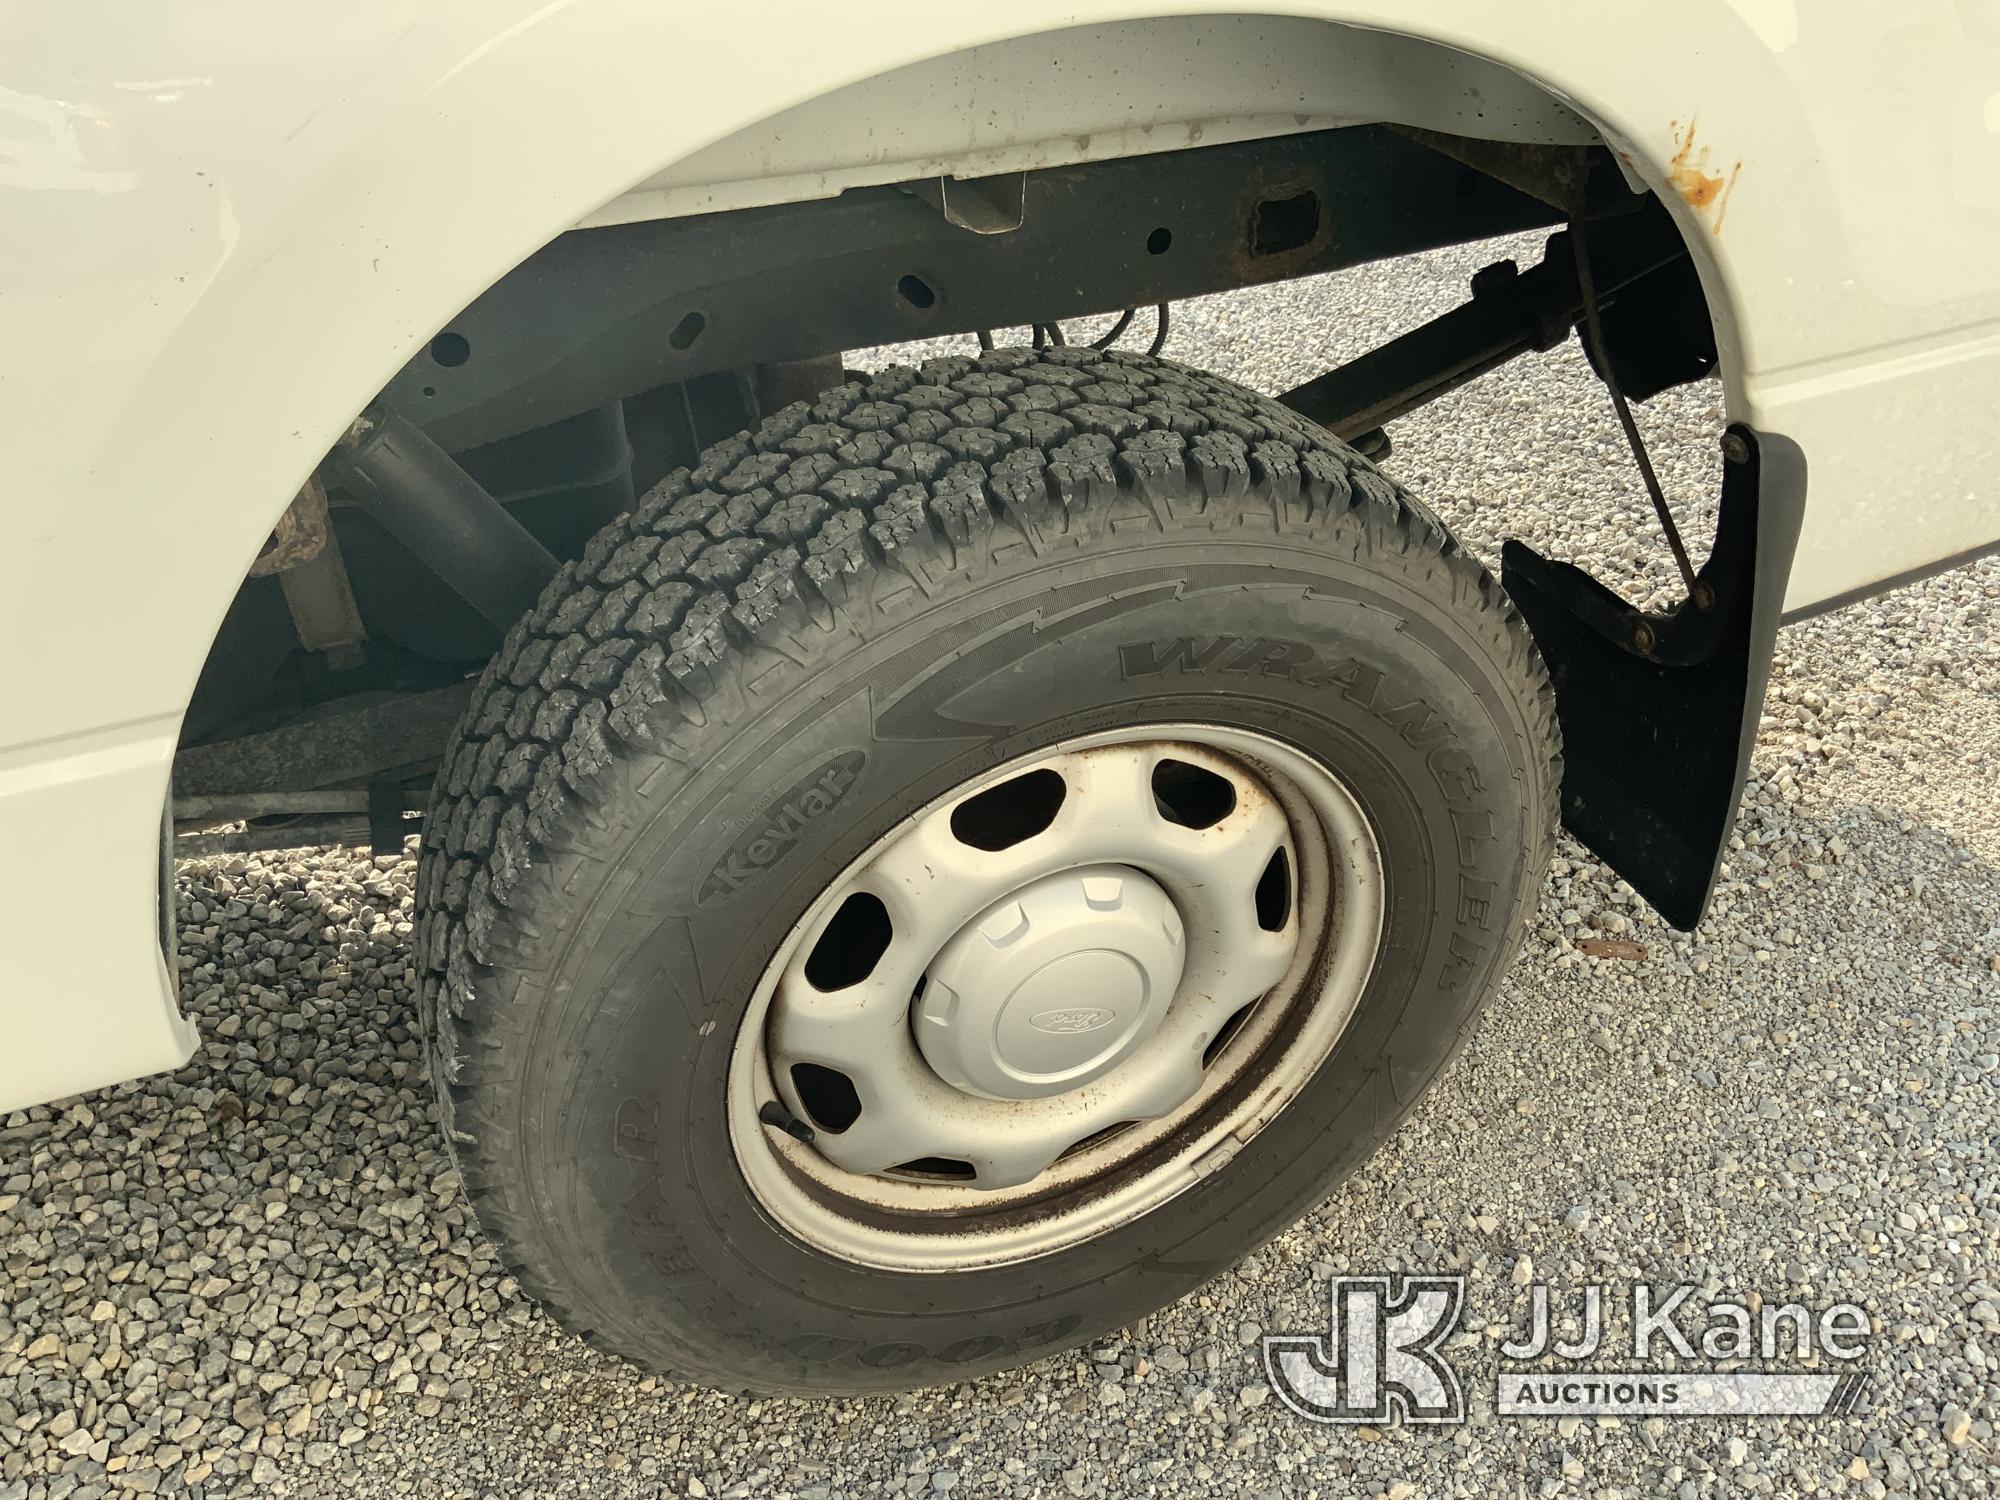 (Fort Wayne, IN) 2013 Ford F150 4x4 Pickup Truck Runs & Moves) (Rust/Body Damage